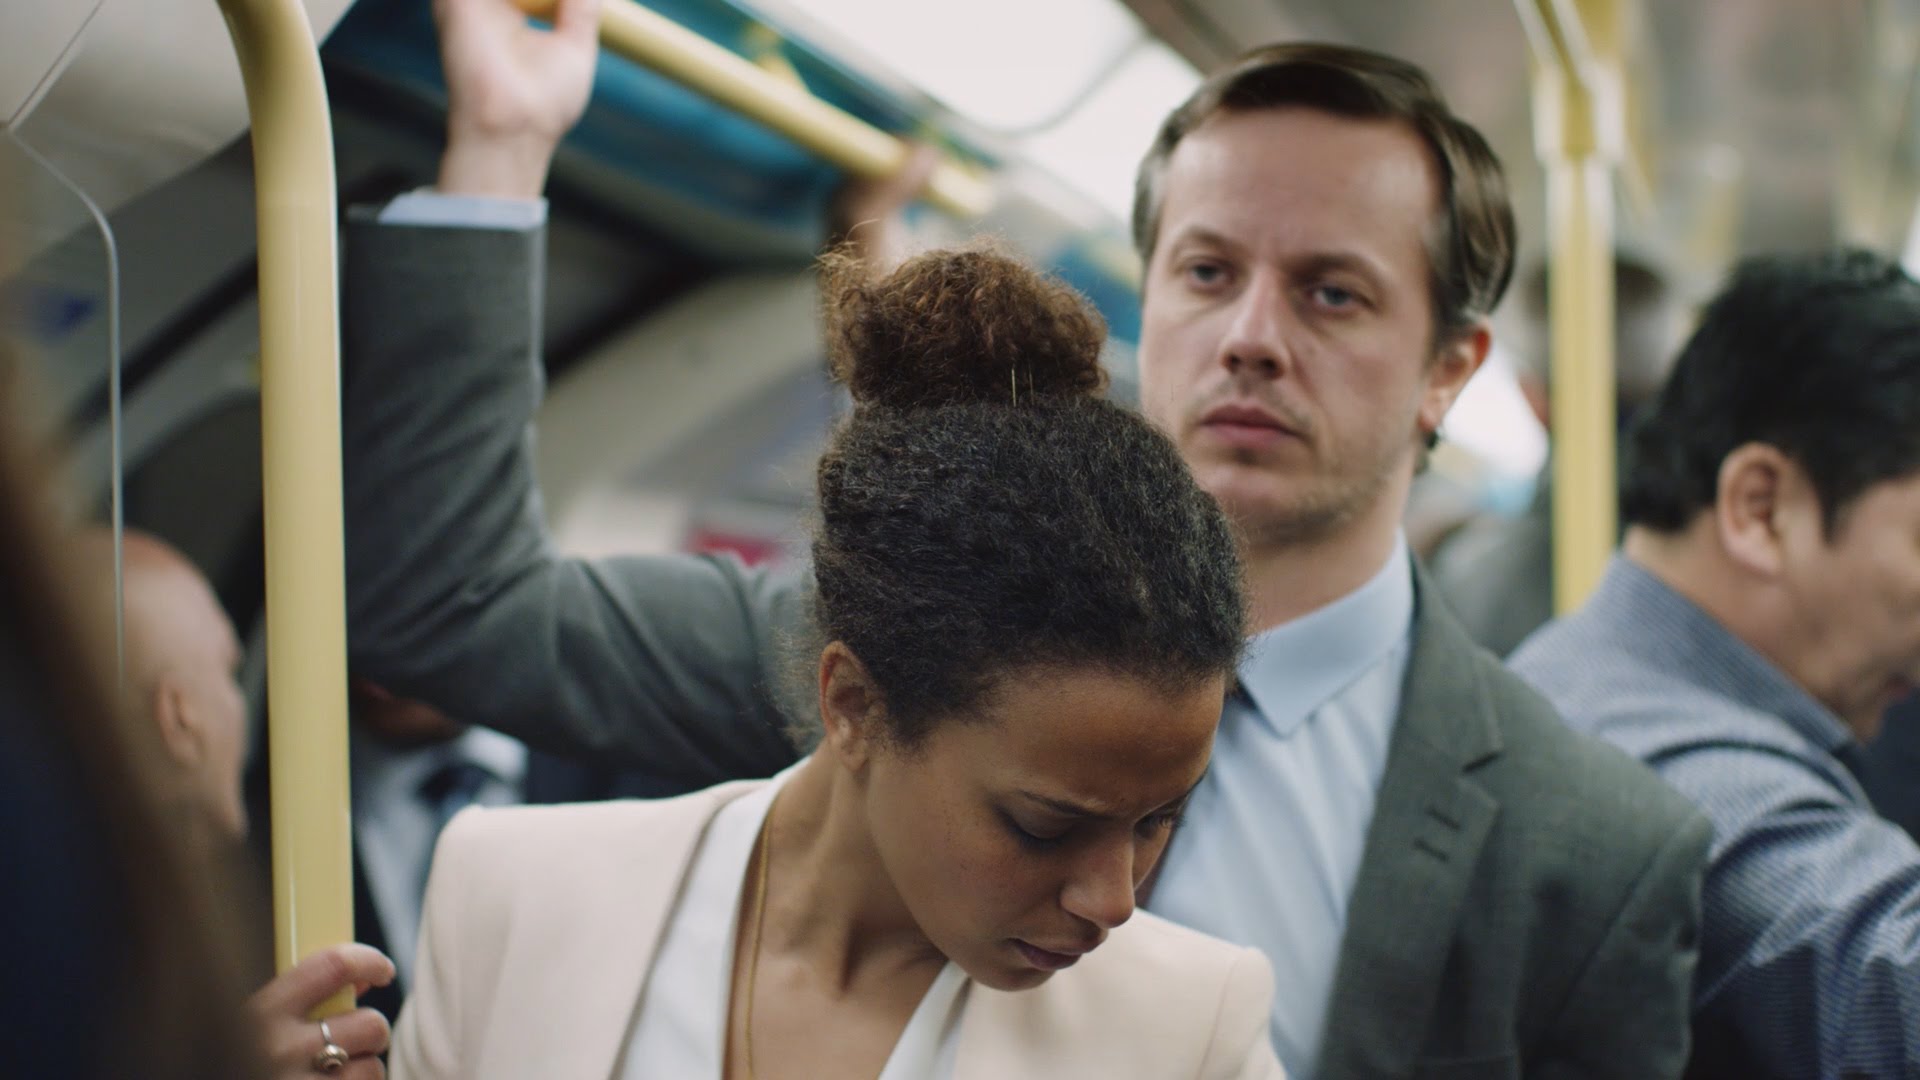 Watch Tfls Powerful New Video About Sexual Harassment On Public 